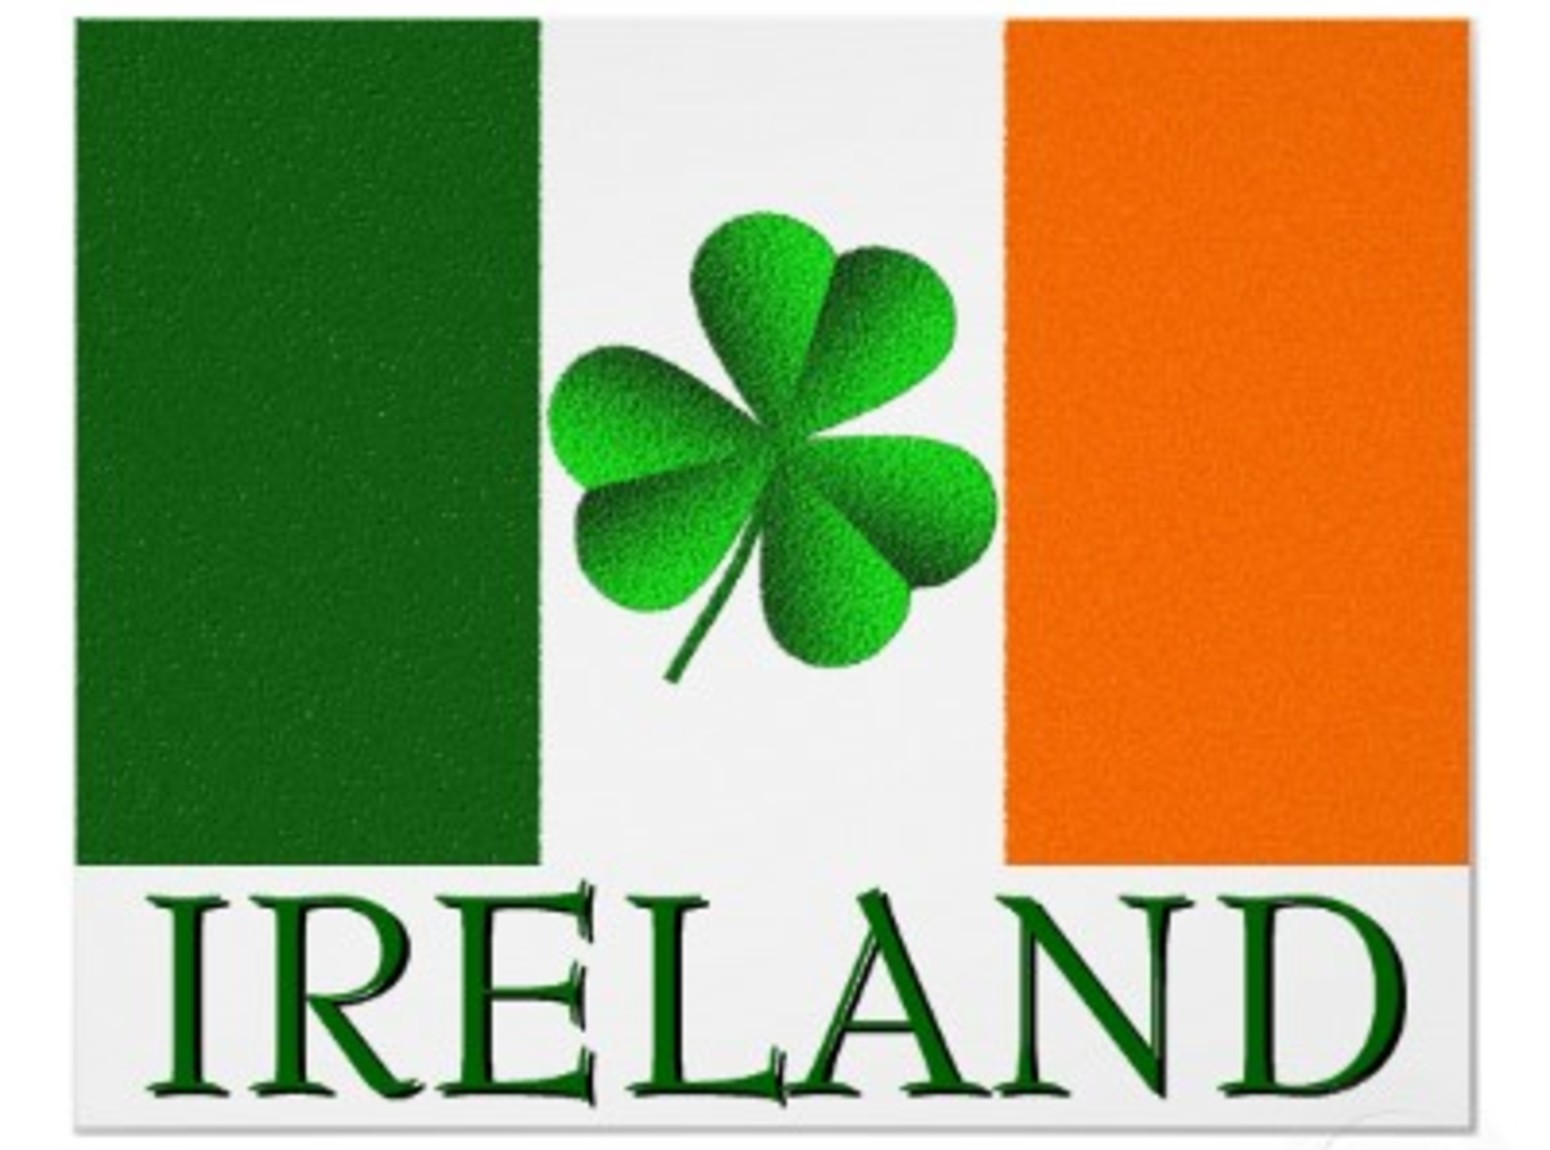 st-patrick-s-day-special-featuring-foy-vance-irish-flag-bread-recipe